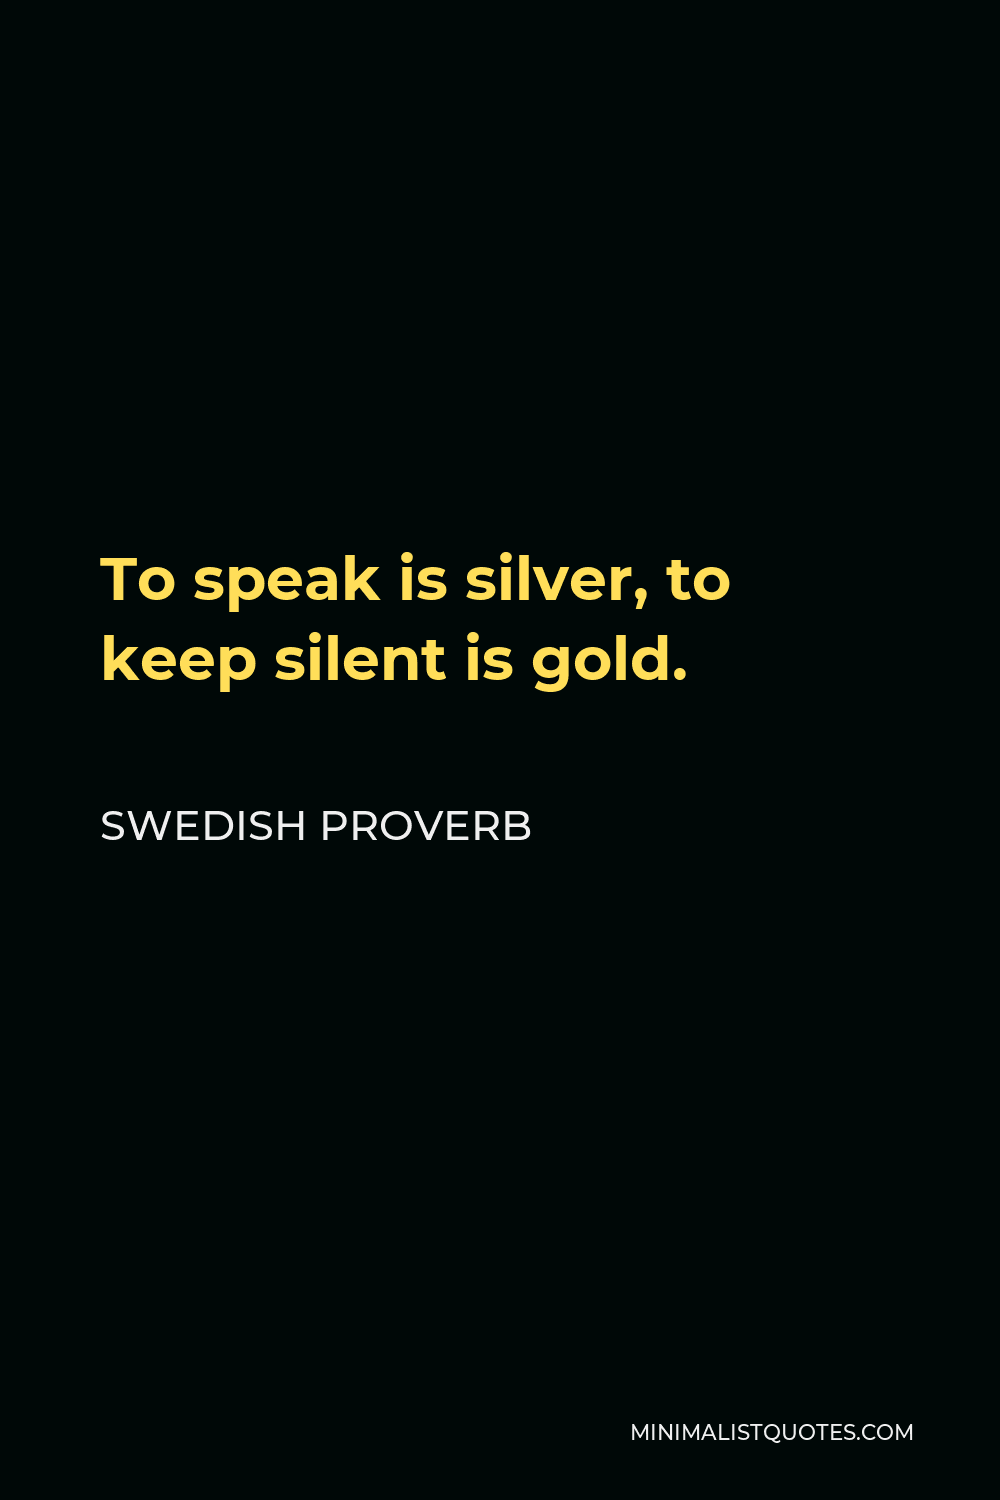 Swedish Proverb Quote - To speak is silver, to keep silent is gold.